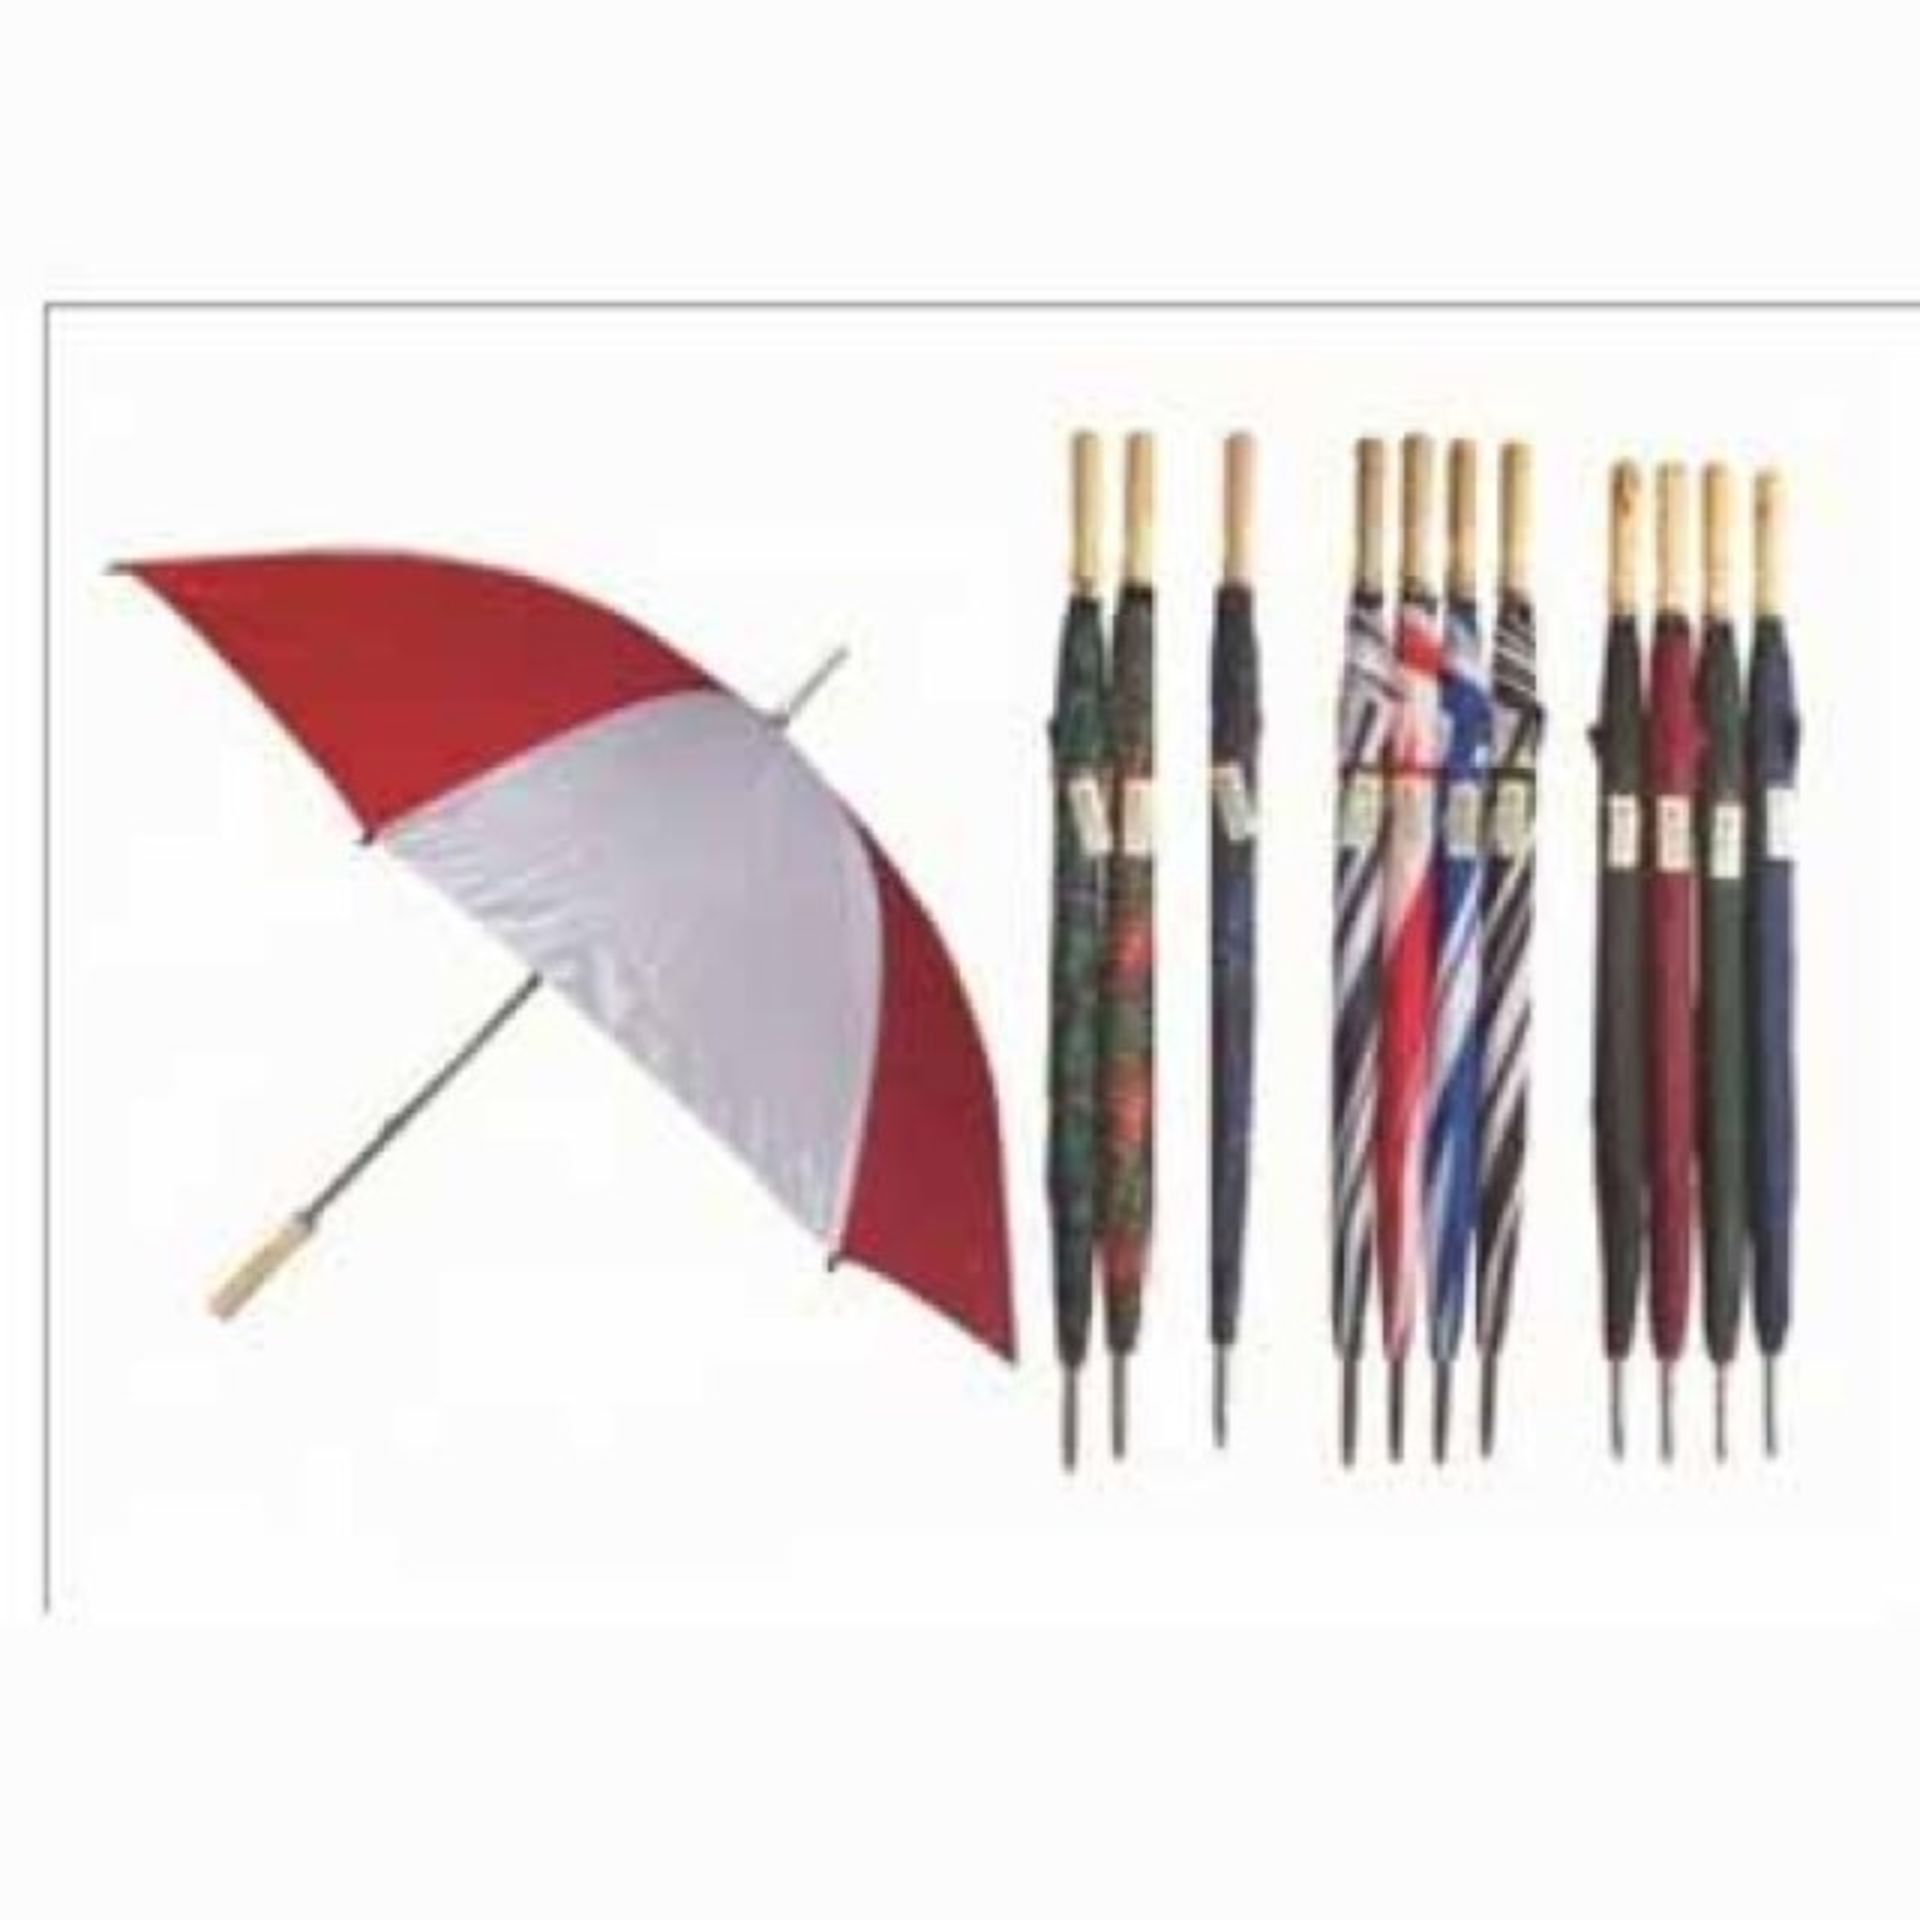 V *TRADE QTY* Brand New Large Umbrella Various Colours and Patterns X 4 YOUR BID PRICE TO BE